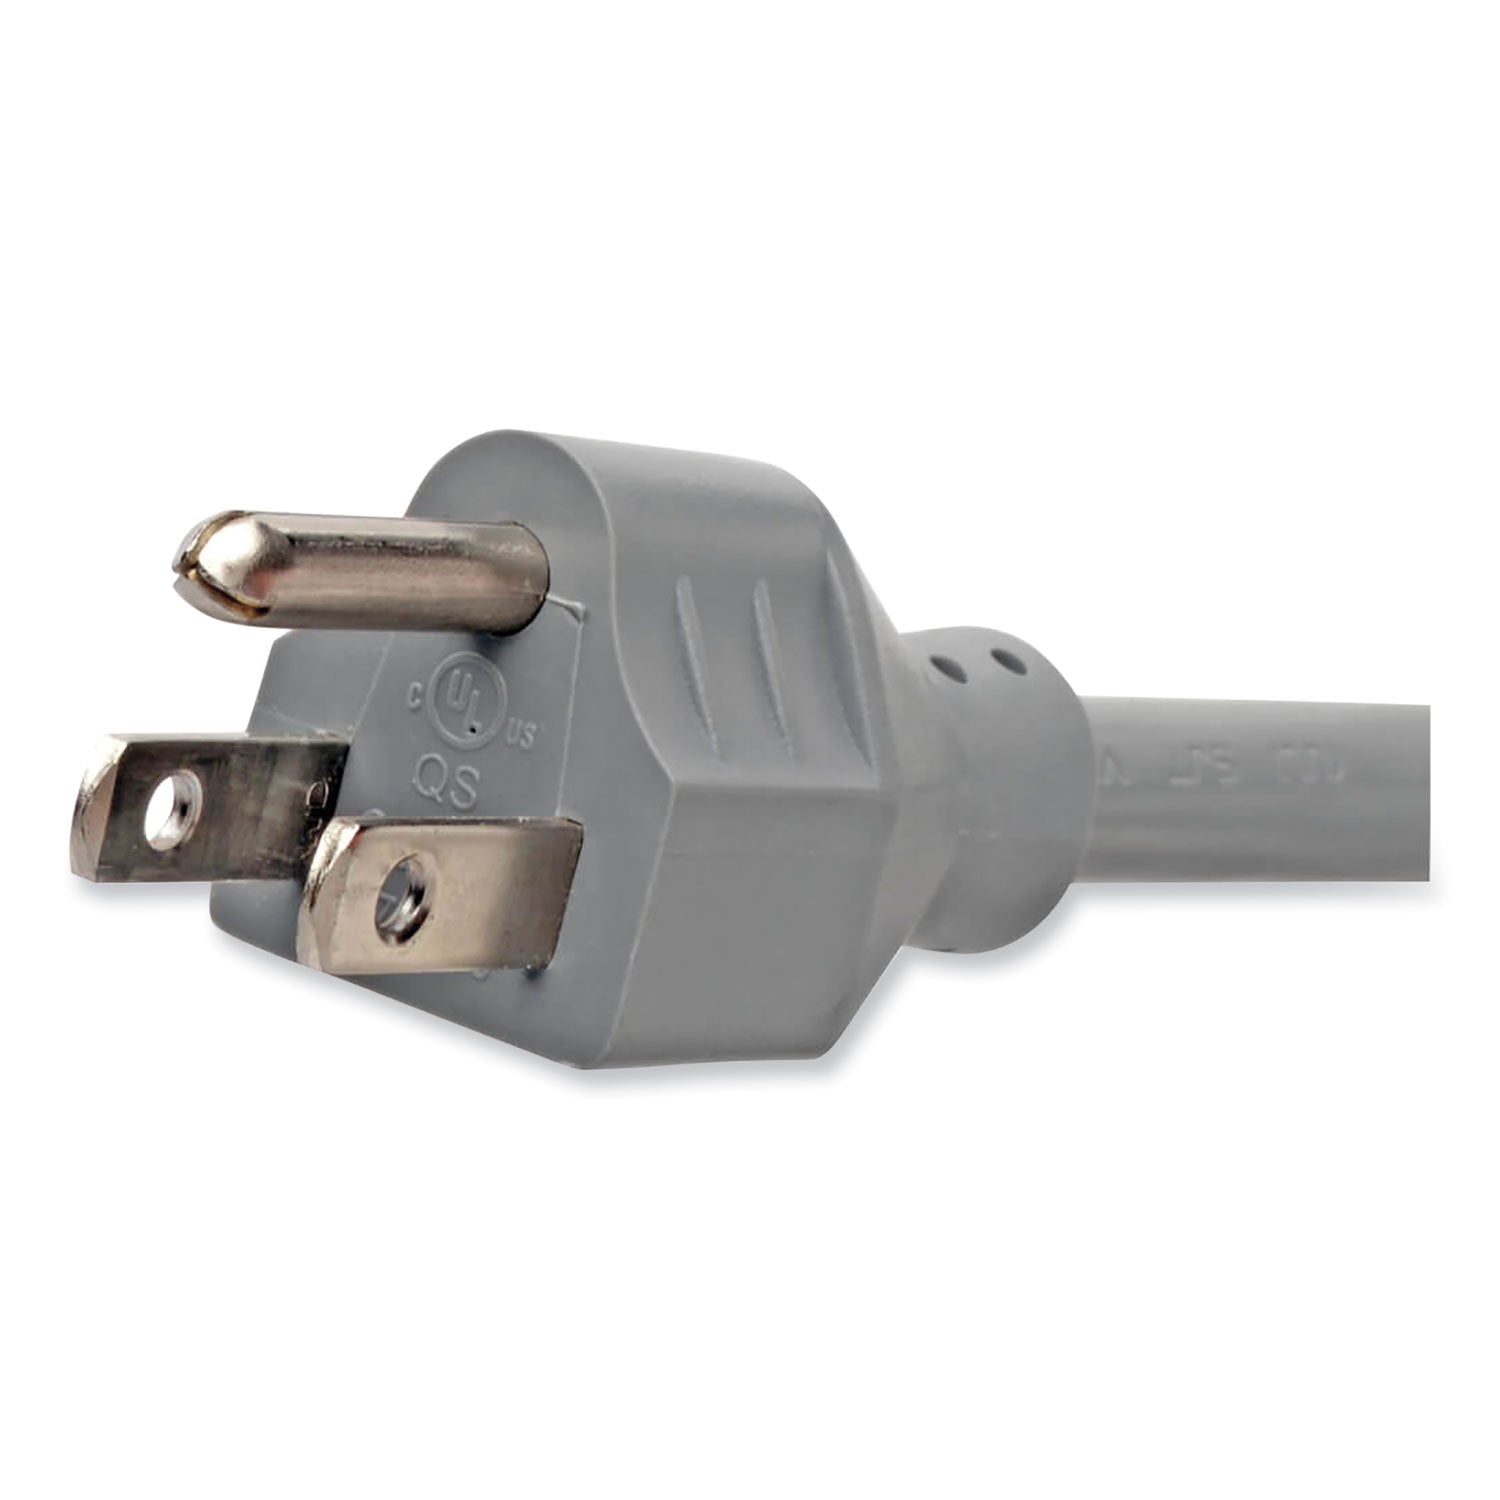 surge-protector-6-ac-outlets-2-usb-a-and-1-usb-c-ports-8-ft-cord-1080-j-gray_trptlp648usbc - 8